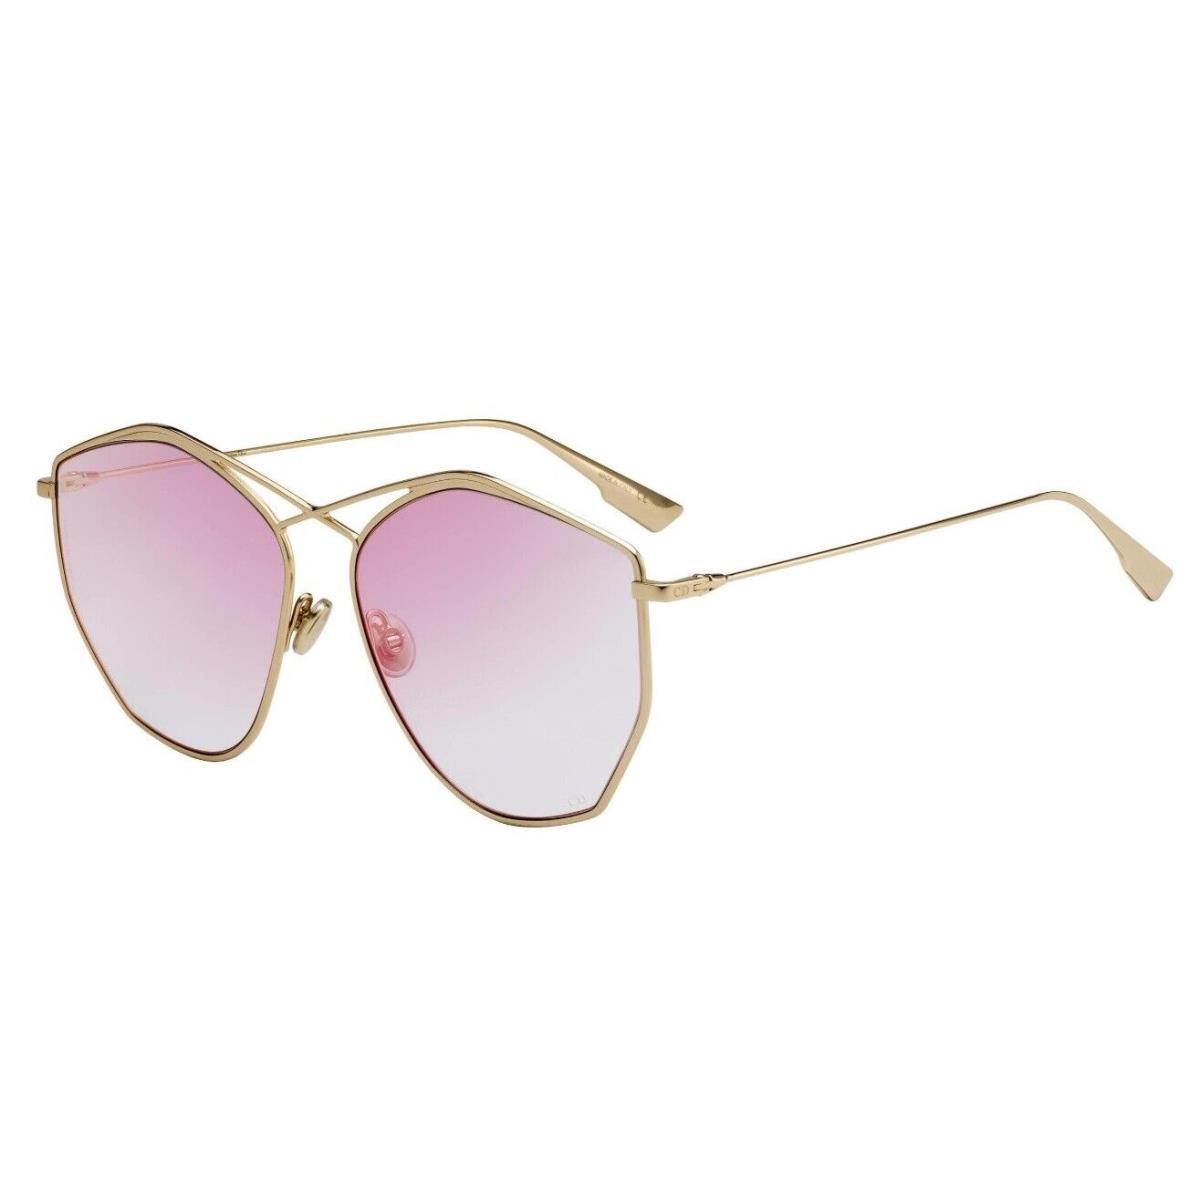 Dior Stellaire 4 Women`s Sunglasses 000TE Rose Gold / Clear Pink Pink - Gold Frame, Clear Lens